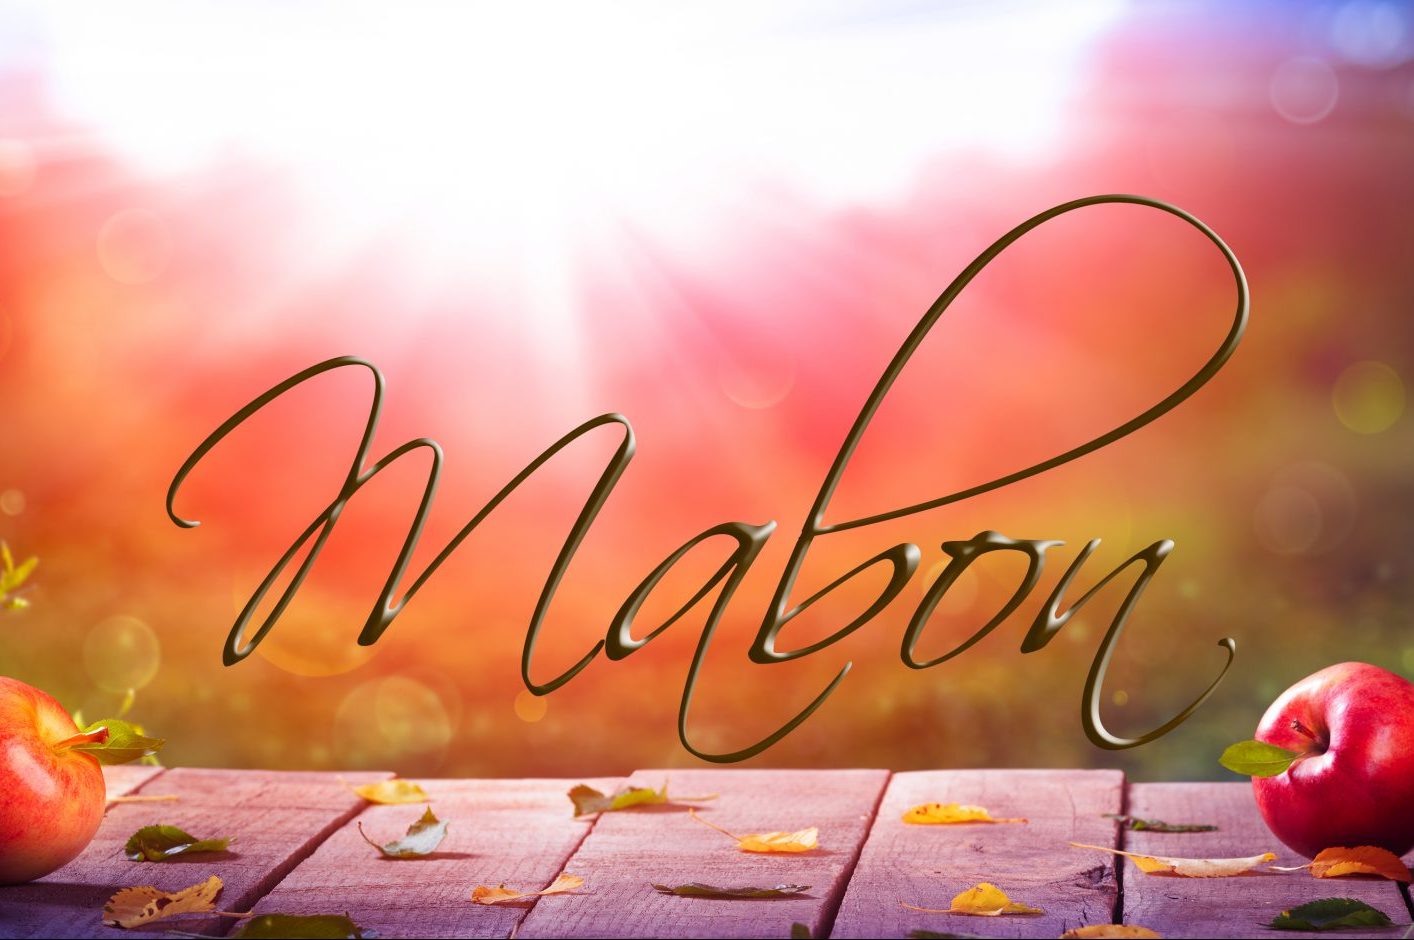 5 Easy Ways to get into the Spirit of Mabon Wheel of the Year